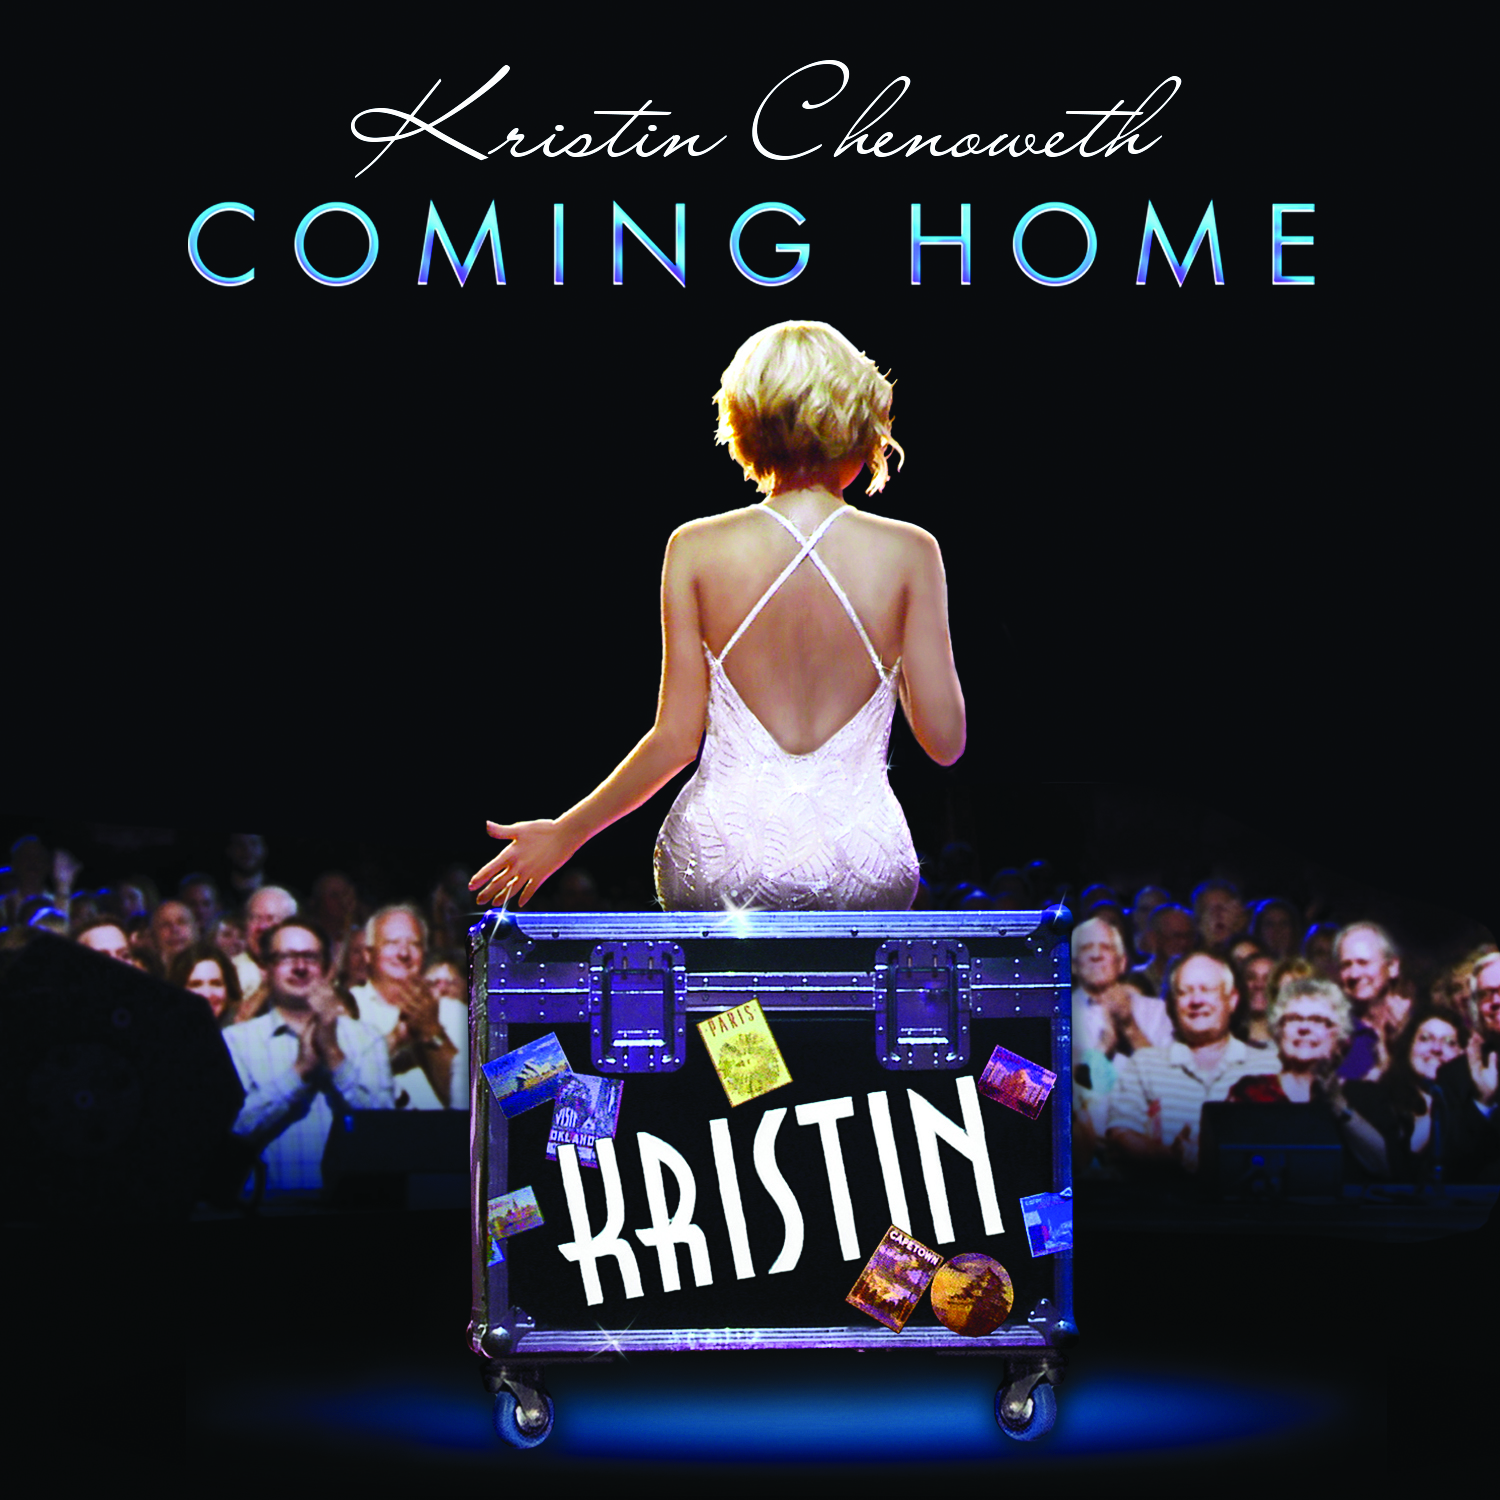 Emmy and Tony Award Winner KRISTIN CHENOWETH In Concert October 24 at Chicago Theatre 1 Emmy and Tony Award winning actress and singer, Kristin Chenoweth will be in concert one night only, October 24, 2015 at the Chicago Theatre.  Tickets are $89-$237.  For more information visit www.officialkristinchenoweth.com  Bio Info:
Emmy and Tony Award winning actress and singer, Kristin Chenoweth, takes the lead in a career that spans film, television, voiceover and stage, effortlessly. She received an Emmy Award for Best Supporting Actress in a Comedy Series for her work on the ABC series Pushing Daisies (Pushing Daisies was also nominated for a Golden Globe Award and Emmy Award for “Best Television Series – Musical or Comedy.”) More recently, Chenoweth lit up the stage of McKinley High as a former student who returned to town with more than the baggage from her flight, on Fox’s hit comedy, Glee. In her role as Glee’s quirky ex-songstress, April Rhodes, she was nominated for two Emmy Awards and a People’s Choice Award in the category of “Favorite TV Guest Star.” Though Kristin has often come into our livingrooms on hit shows such as The West Wing (where she starred as Annabeth Schott) and as a guest judge on both American Idol and Project Runway, she may be most remembered by Broadway lovers everywhere for her origination of the role of Glinda the Good Witch in Wicked, which earned her a Tony Award Nomination, and her Tony-winning performance in You’re A Good Man, Charlie Brown, for which she stole the show and many hearts in the process. Last spring, Chenoweth once again reinvented herself, starring as a poisonous frog named Gabi in the hit animated film Rio 2. She also appeared in a guest arc on the TV Land series “Kirstie” and reprised her nominated role in the 100th episode of “Glee.” Last May, she returned to the famed Carnegie Hall for a sold-out concert. Her first solo-concert at Carnegie Hall was in 2004, also to a sold-out audience. On stage, she performed songs from her album, Some Lessons Learned, as well as some of her most memorable songs from Broadway’s Wicked, Promises Promises, and TV’s Glee. Last July, she performed “An Evening With…” show at London’s grade one listed and highly prestigious concert hall the Royal Albert Hall, in which she received a record-breaking standing ovation from the sold-out crowd. Last September, she was featured in the Star-Spangled Spectacular: Bicentennial of our National Anthem, a concert special honoring the 200th anniversary of our national anthem, in Baltimore, Maryland. The event was televised live on PBS as part of the network’s Great Performances series. Chenoweth recently hosted the PBS Arts Fall Festival, which featured classic Broadway hits, music from around the country and theatre performances. The festival included her own concert performance, Kristin Chenoweth: Coming Home, where she performed a career-spanning concert in her hometown of Broken Arrow, Oklahoma. The concert was released as a live CD and DVD, and aired as a PBS television special Thanksgiving weekend.
Chenoweth will next be seen on-screen in the Universal film The Boy Next Door, alongside Jennifer Lopez, and in the animated Lucasfilm fairy tale musical Strange Magic, both set to be released on January 23. She will also be seen in the film A Bet’s A Bet (International title: The Opposite Sex), releasing in January. She’s completed production on the indie teen drama entitled Hard Sell and the Disney Channel’s live-action original movie Descendants, in which she will play the classic Sleeping Beauty villain Maleficent. Chenoweth will return to Broadway, playing the glamorous film star, Lily Garland, in the Roundabout Theatre Company’s 20-week limited engagement of On the Twentieth Century in March.
A veteran of the concert stage, Kristin has performed to sold-out crowds in concert halls across the country. In 2013, she made her Australian national touring debut, headlining the Adelaide Cabaret Festival and performing at the famed Sydney Opera House. She made national headlines with her stunning renditions of Hollywood’s most beloved songs from classic films, when she performed to a sold-out crowd at the Hollywood Bowl with the Los Angeles Philharmonic. In 2013, Kristin also performed to a sold-out audience at The Allen Room in New York’s acclaimed Lincoln Center for the Performing Arts, with her show - Kristin Chenoweth: The Dames of Broadway… All of ‘Em!!!, directed by Richard Jay Alexander, which also aired on PBS.
Additional touring highlights include: a sold-out Los Angeles solo debut at the Walt Disney Concert Hall, a sold-out solo concert at The Metropolitan Opera House – and the third theater star ever to present a solo concert at the MET, an evening at The Greek Theatre in Los Angeles, the Washington National Opera’s 50th Anniversary Gala with Placido Domingo, a solo concert at Sam Mendes’ acclaimed, Donmar Warehouse, as part of the Divas at Donmar series, and collaborations with renowned symphonies, including - The New York Philharmonic, Boston Pops, National Symphony Orchestra, Chicago Symphony and the San Francisco Symphony. In addition to her starring roles on stage and screen, in 2009, Kristin also wrote an upliftingly candid, comedic chronicle of her life so far, in, A Little Bit Wicked, which was released by Simon & Schuster, and debuted at # 12 on the New York Times Hardcover Non-Fiction Best Seller List.
It’s no secret that Kristin wears her heart on her sleeve when it comes to her love of theater, which was the catalyst for her charity partnership with the Broken Arrow Performing Arts Center (BA PAC) Foundation in her home town in Oklahoma. The Kristin Chenoweth Theater at the BA PAC, renamed in 2012 to celebrate its biggest advocate, supporter and celebrated role model to aspiring hometown performers, welcomes internationally acclaimed concert artists and Broadway productions, provides educational outreach and master classes with touring artists, after-school and summer arts institutes, scholarship programs, community enrichment and opportunities for students to travel and perform on a national level.
Kristin is also a passionate supporter of charities which dedicate their time and efforts to helping those in need, such as: the Kristin Chenoweth Art & Education Fund, The Red Cross, Broadway Cares EFA, The Point Foundation, ASTEP, breast cancer awareness, adoption advocacy and organizations supporting animal welfare. Chenoweth earned a Bachelor’s degree in Musical Theater and a Master’s degree in Opera Performance from Oklahoma City University. She was also presented with Honorary Doctorate degrees from both the University of North Carolina School of the Arts and her alma mater, Oklahoma City University. Kristin is an inductee into the Oklahoma Hall of Fame, as well as the Oklahoma Music Hall of Fame.